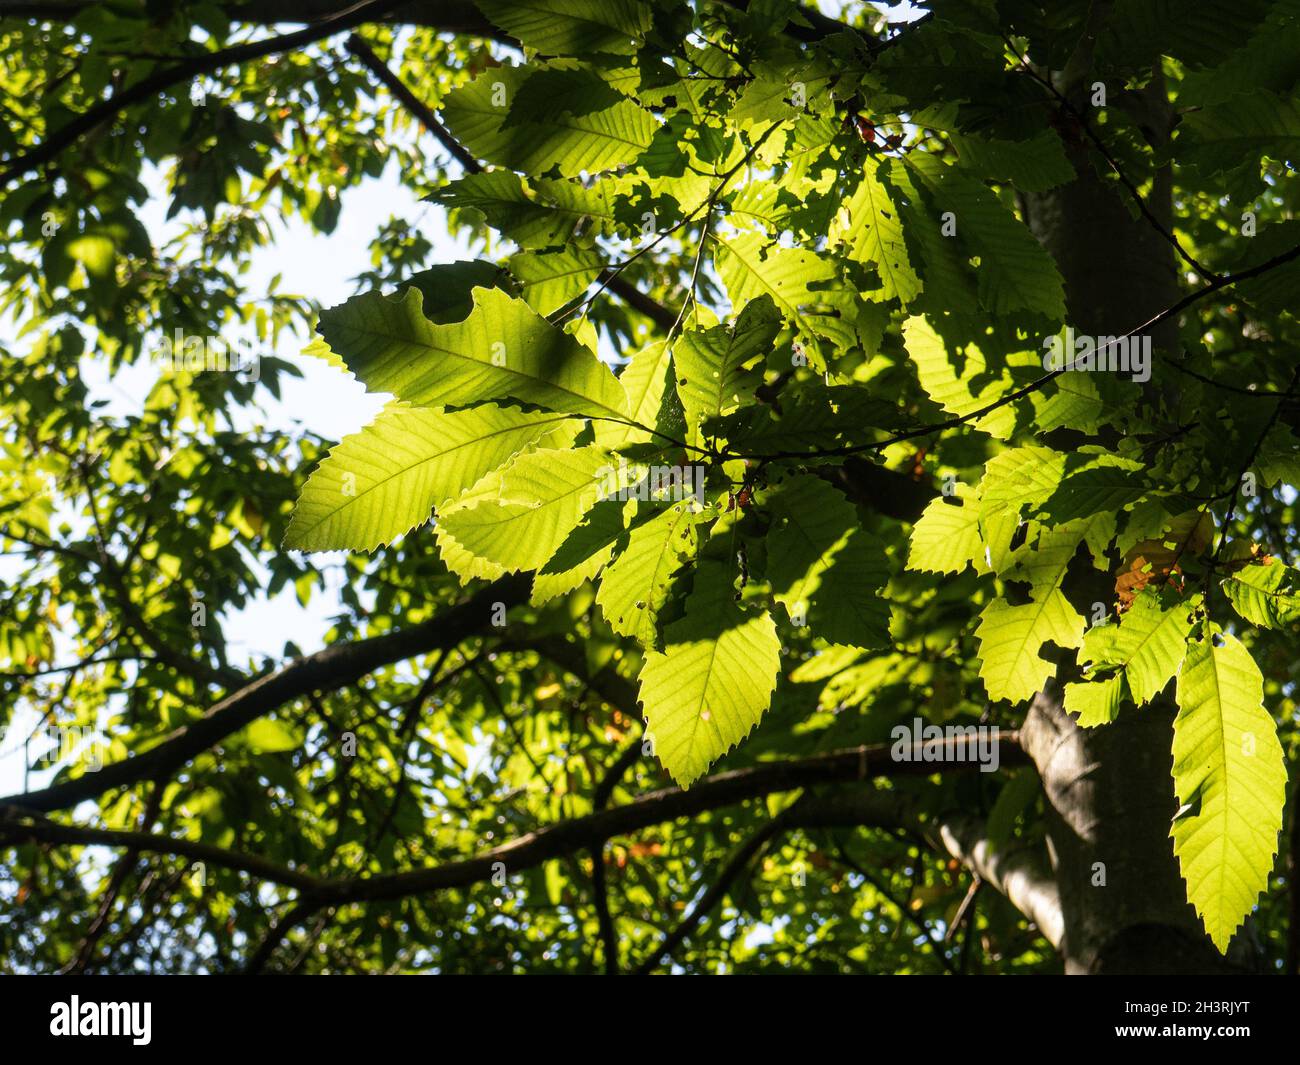 Sunlight shining though fresh green sweet chestnut leavesmaking patterns of light and shade Stock Photo